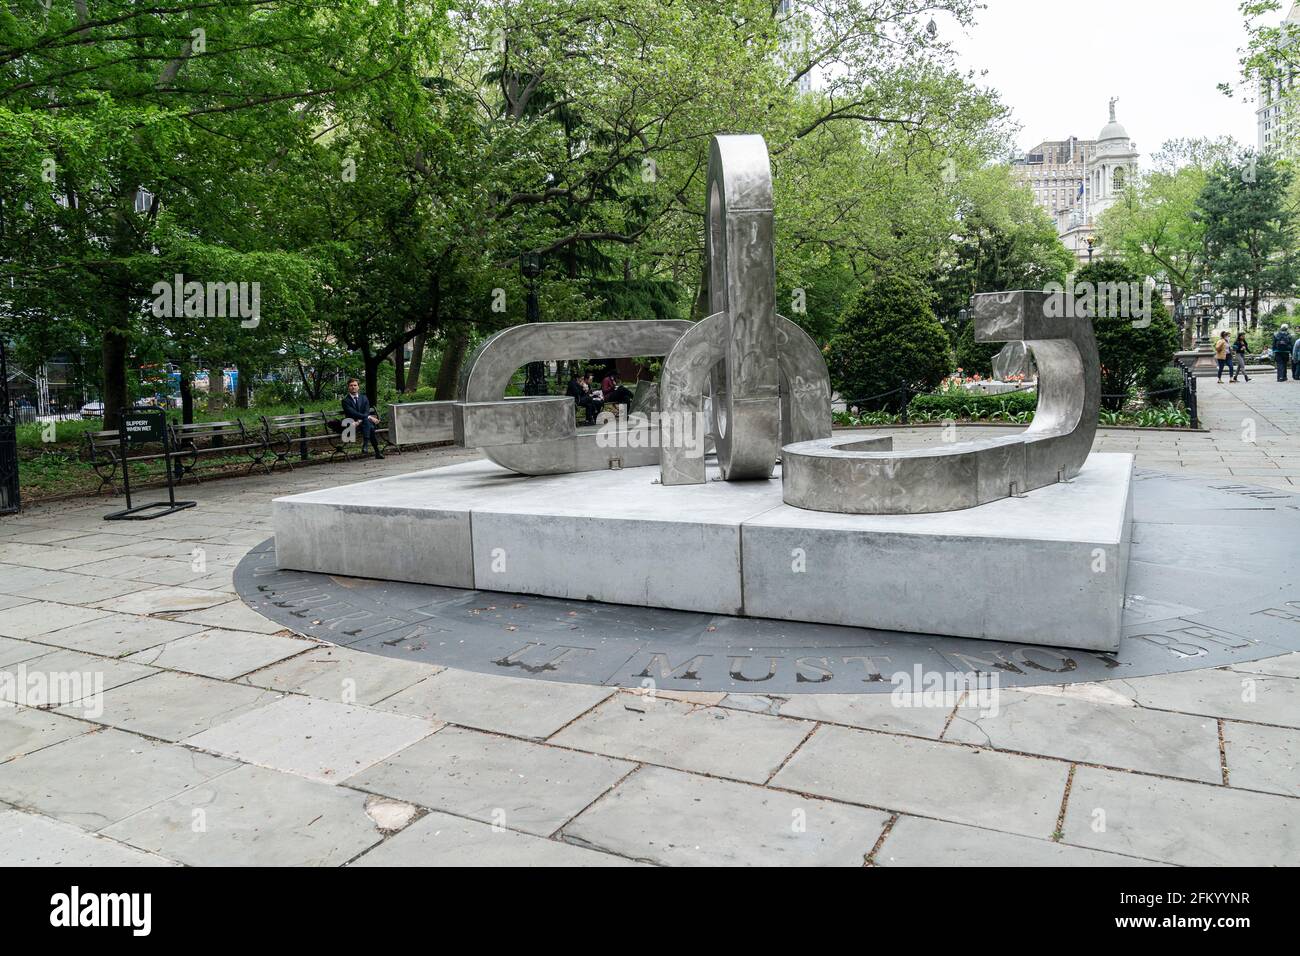 New York, NY - May 4, 2021: Unveiling of sculptures Brighter Days by Melvin Edwards at CIty Hall Park sponsored by Public Art Fund Stock Photo